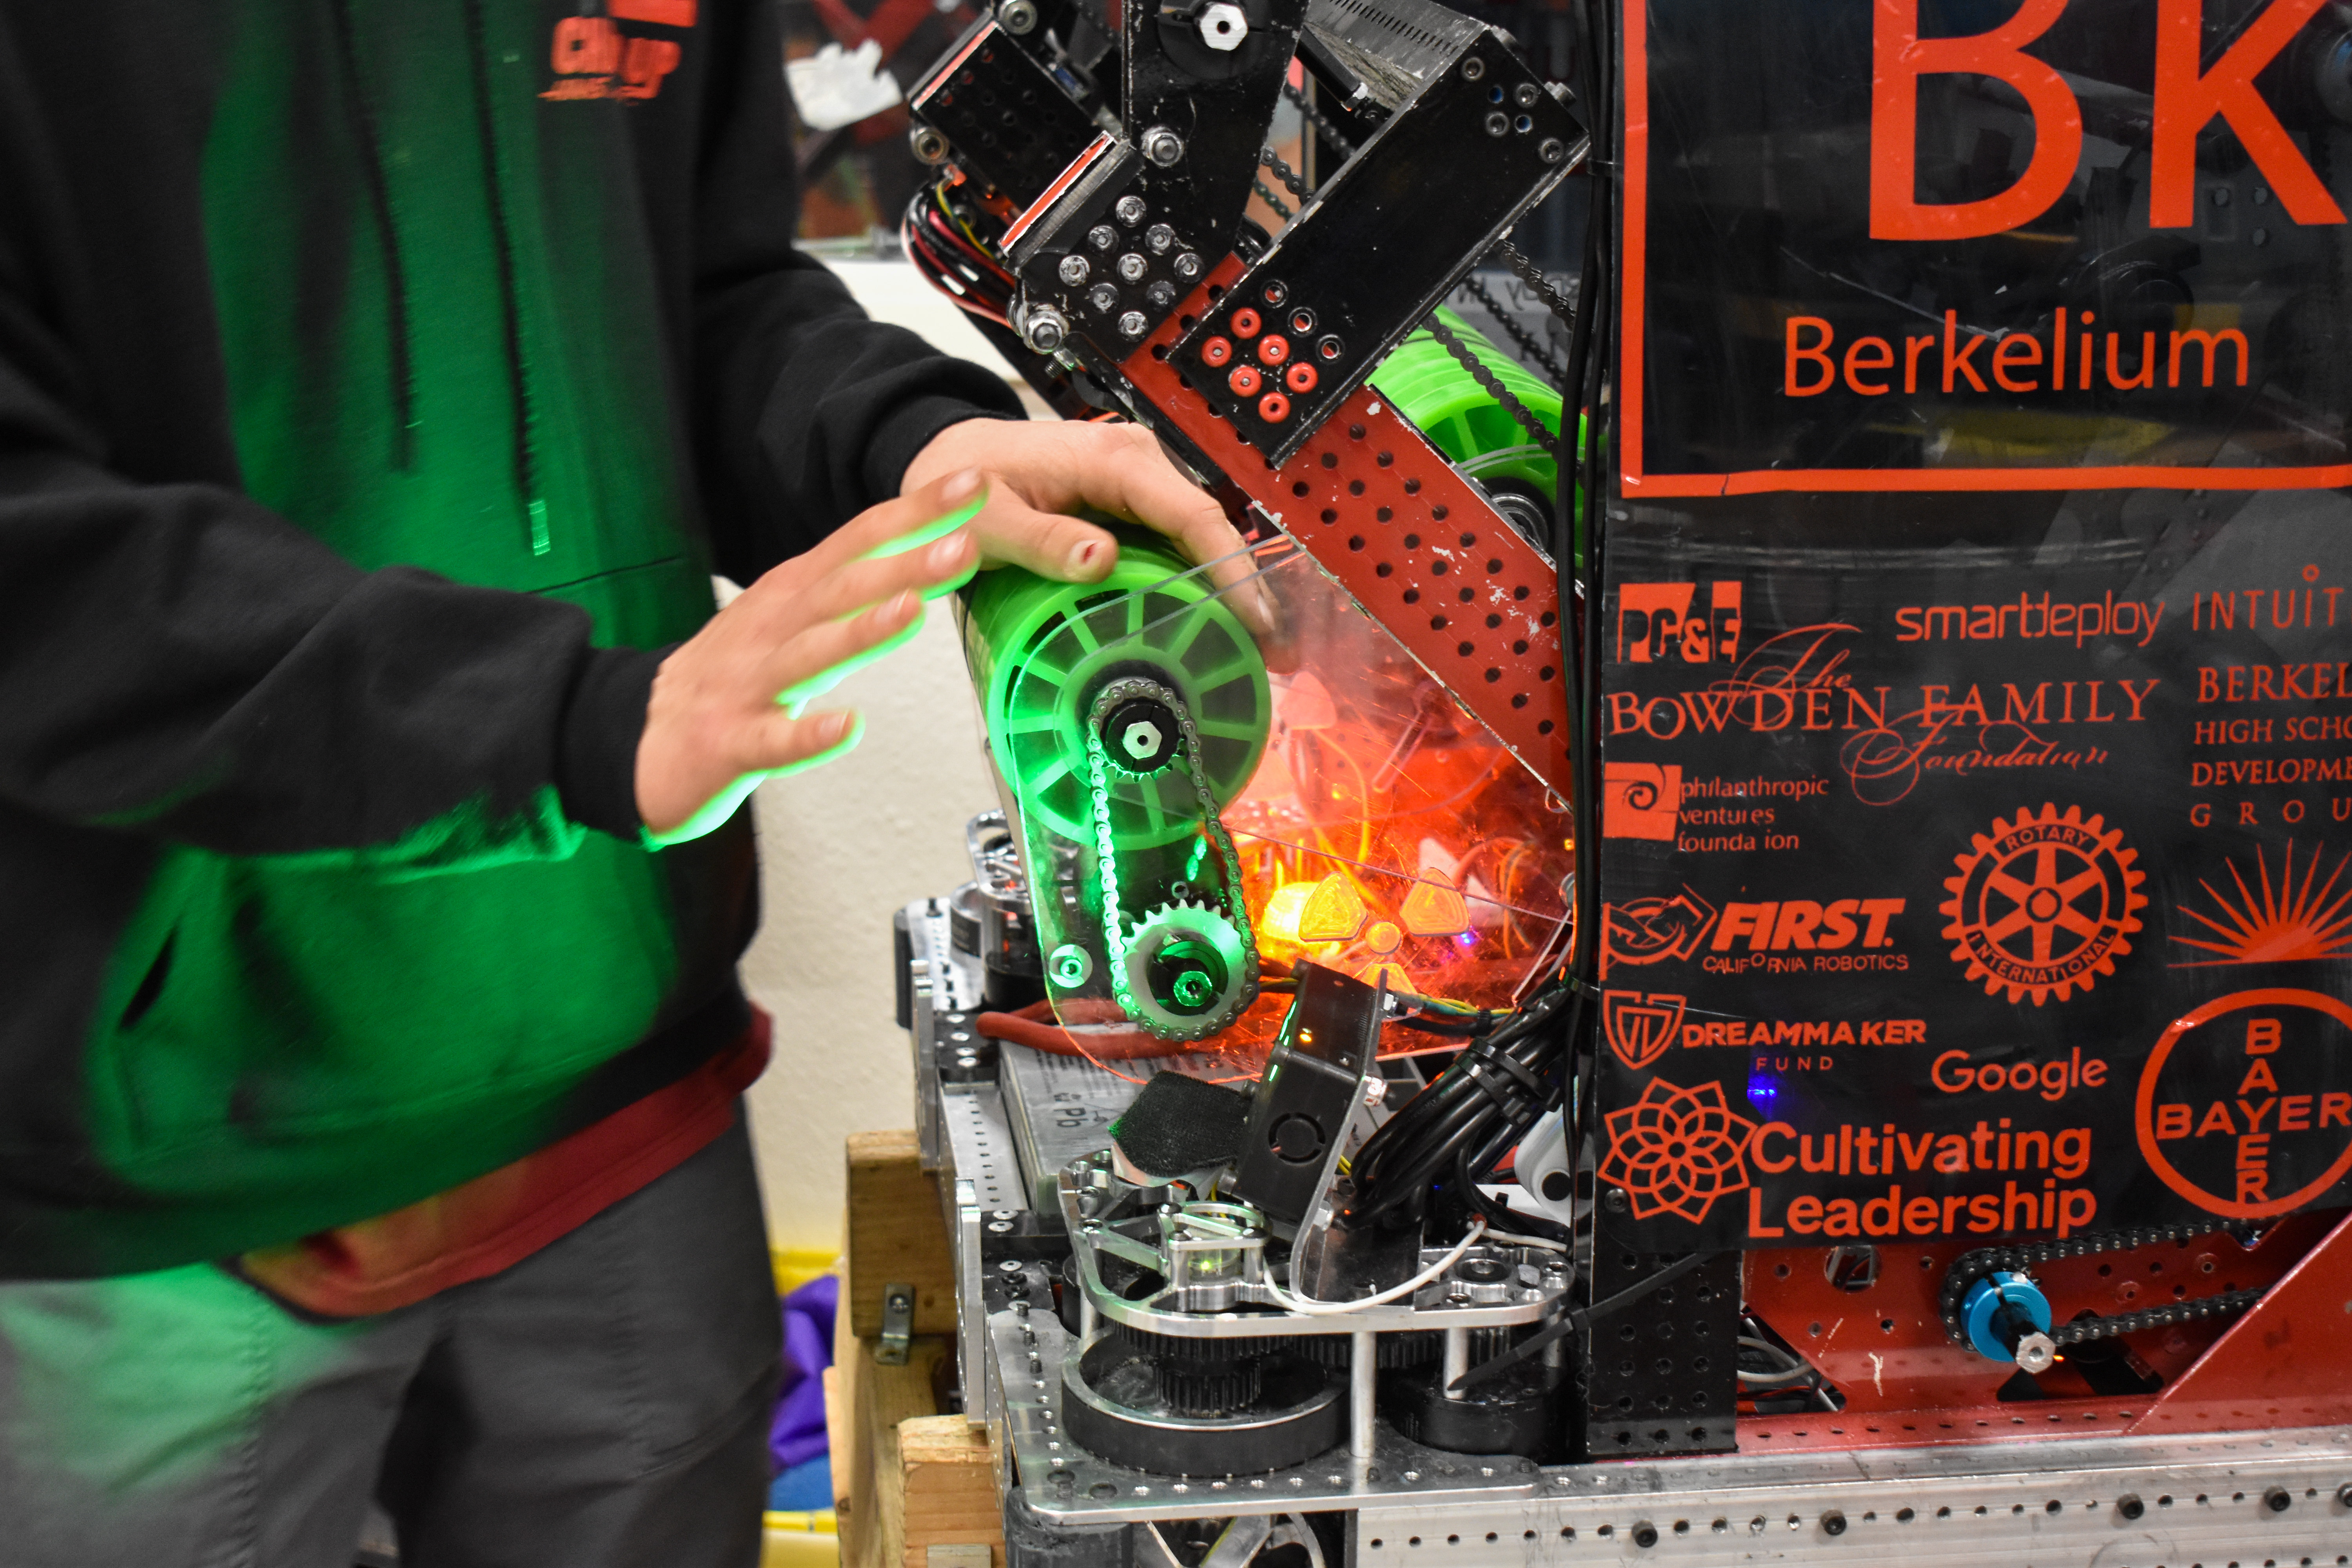 Someone is working on a robot that has the name of the robotics team, which is Berkelium.